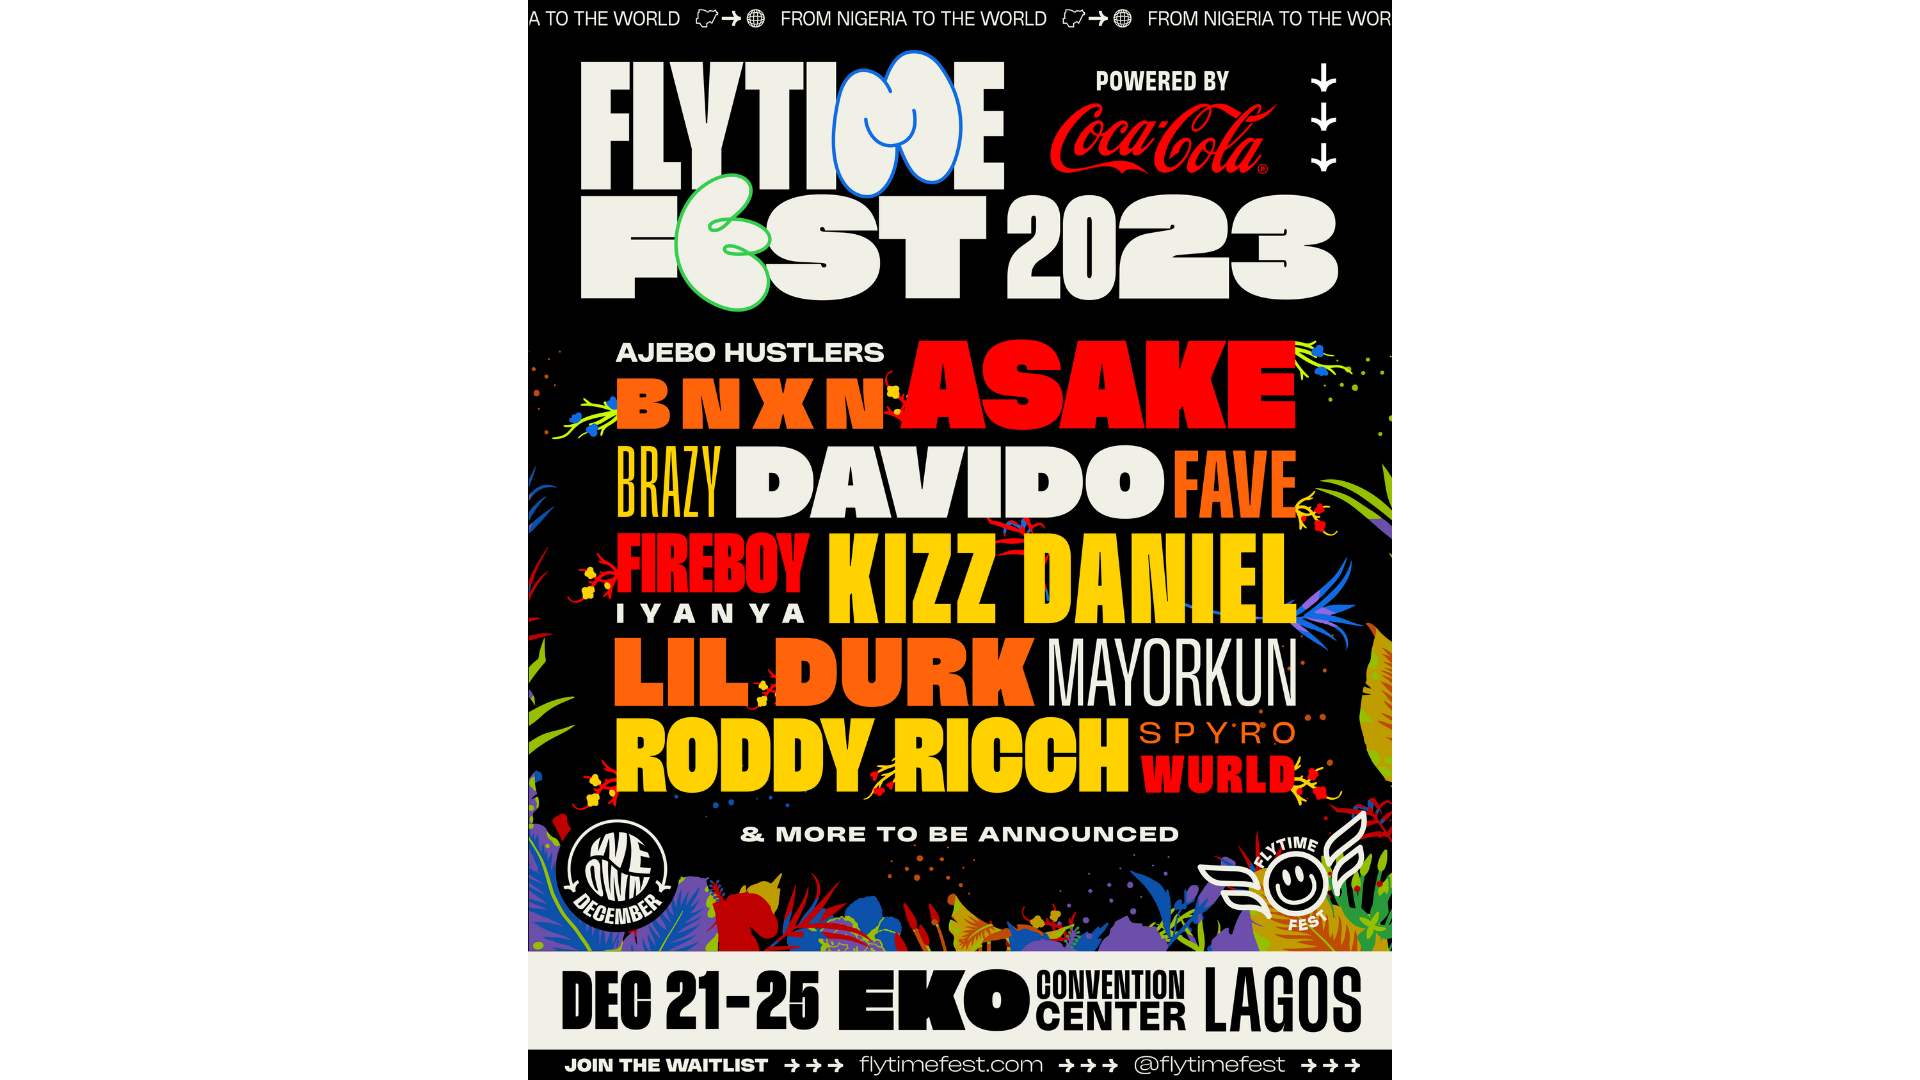 Flytime Fest 2023 is here! From Dec 21st to 25th, at the Eko Convention Center in Lagos, you can revel in non-stop music and entertainment.